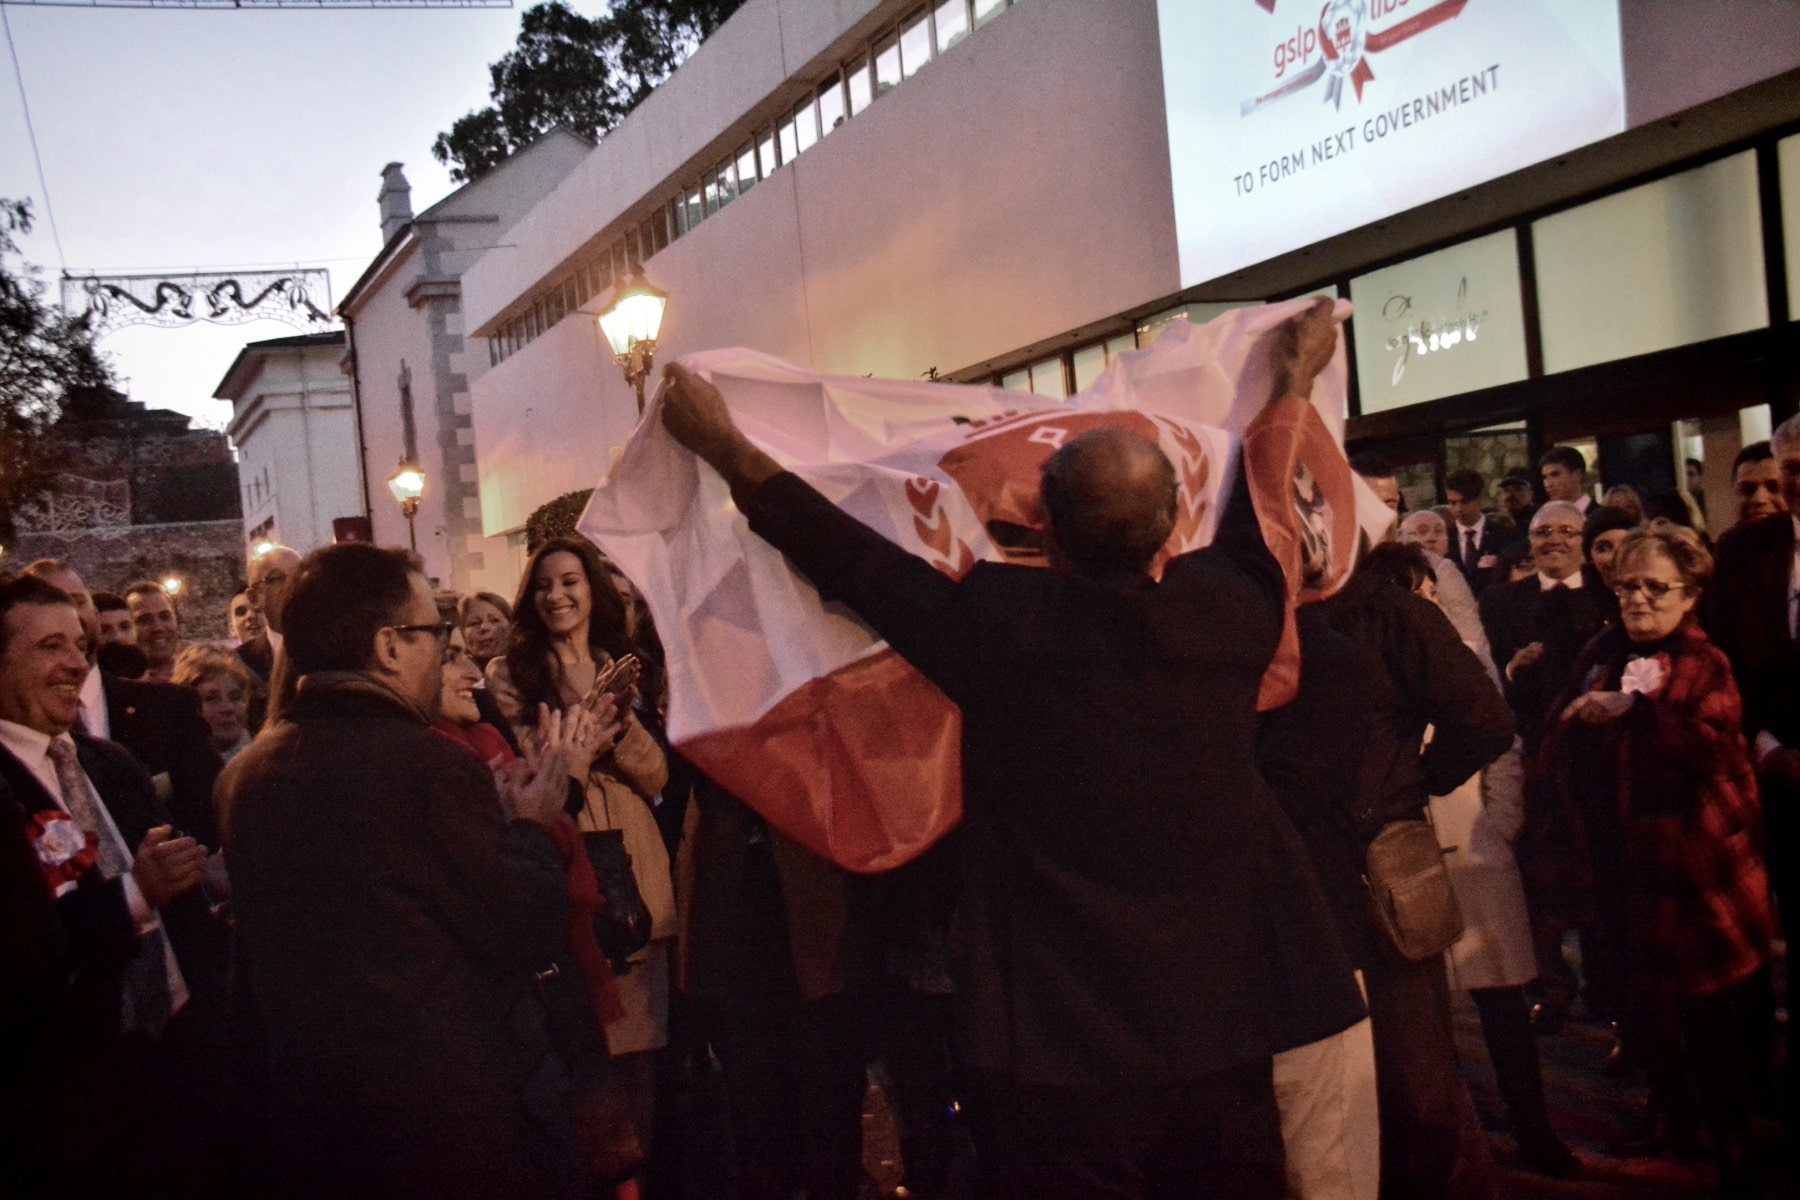 Gibraltar - 27th November 2015 - As Gibraltar woke up for work, John Macintosh Hall closed the count to the general election placing the GSLP/Liberal Alliance as the party to form Government.With an overall mayority 68.03% against the GSD's 31.37, the GSLP/Liberals recorded an overwhelming victory which once again sees Fabian Picardo as the Chief Minister of Gibraltar.The results were: -PICARDO, Fabian Raymond 10852 GARCIA, Joseph John 10661 CORTES, John Emmanuel 10529 LICUDI, Gilbert Horace 10379 ISOLA , Albert Joseph 10313 COSTA, Neil Francis 10048 SACRAMENTO, Samantha Jane 9822 LINARES, Steven Ernest 9690BALBAN, Paul John 9511 BOSSANO, Joseph John 9145FEETHAM, Daniel Anthony 5054 HASSAN NAHON, Marlene Dinah Esther 4892 PHILLIPS, Elliott John 4784 REYES, Edwin Joseph 4766 CLINTON, Roy Mark 4733 HAMMOND, Trevor Nicholas 4578LLAMAS, Lawrence Francis 4565 VASQUEZ, Robert Michael 4535 WHITE, Christopher George 4324 KARNANI-SANTOS, Kim Sylvia 4314